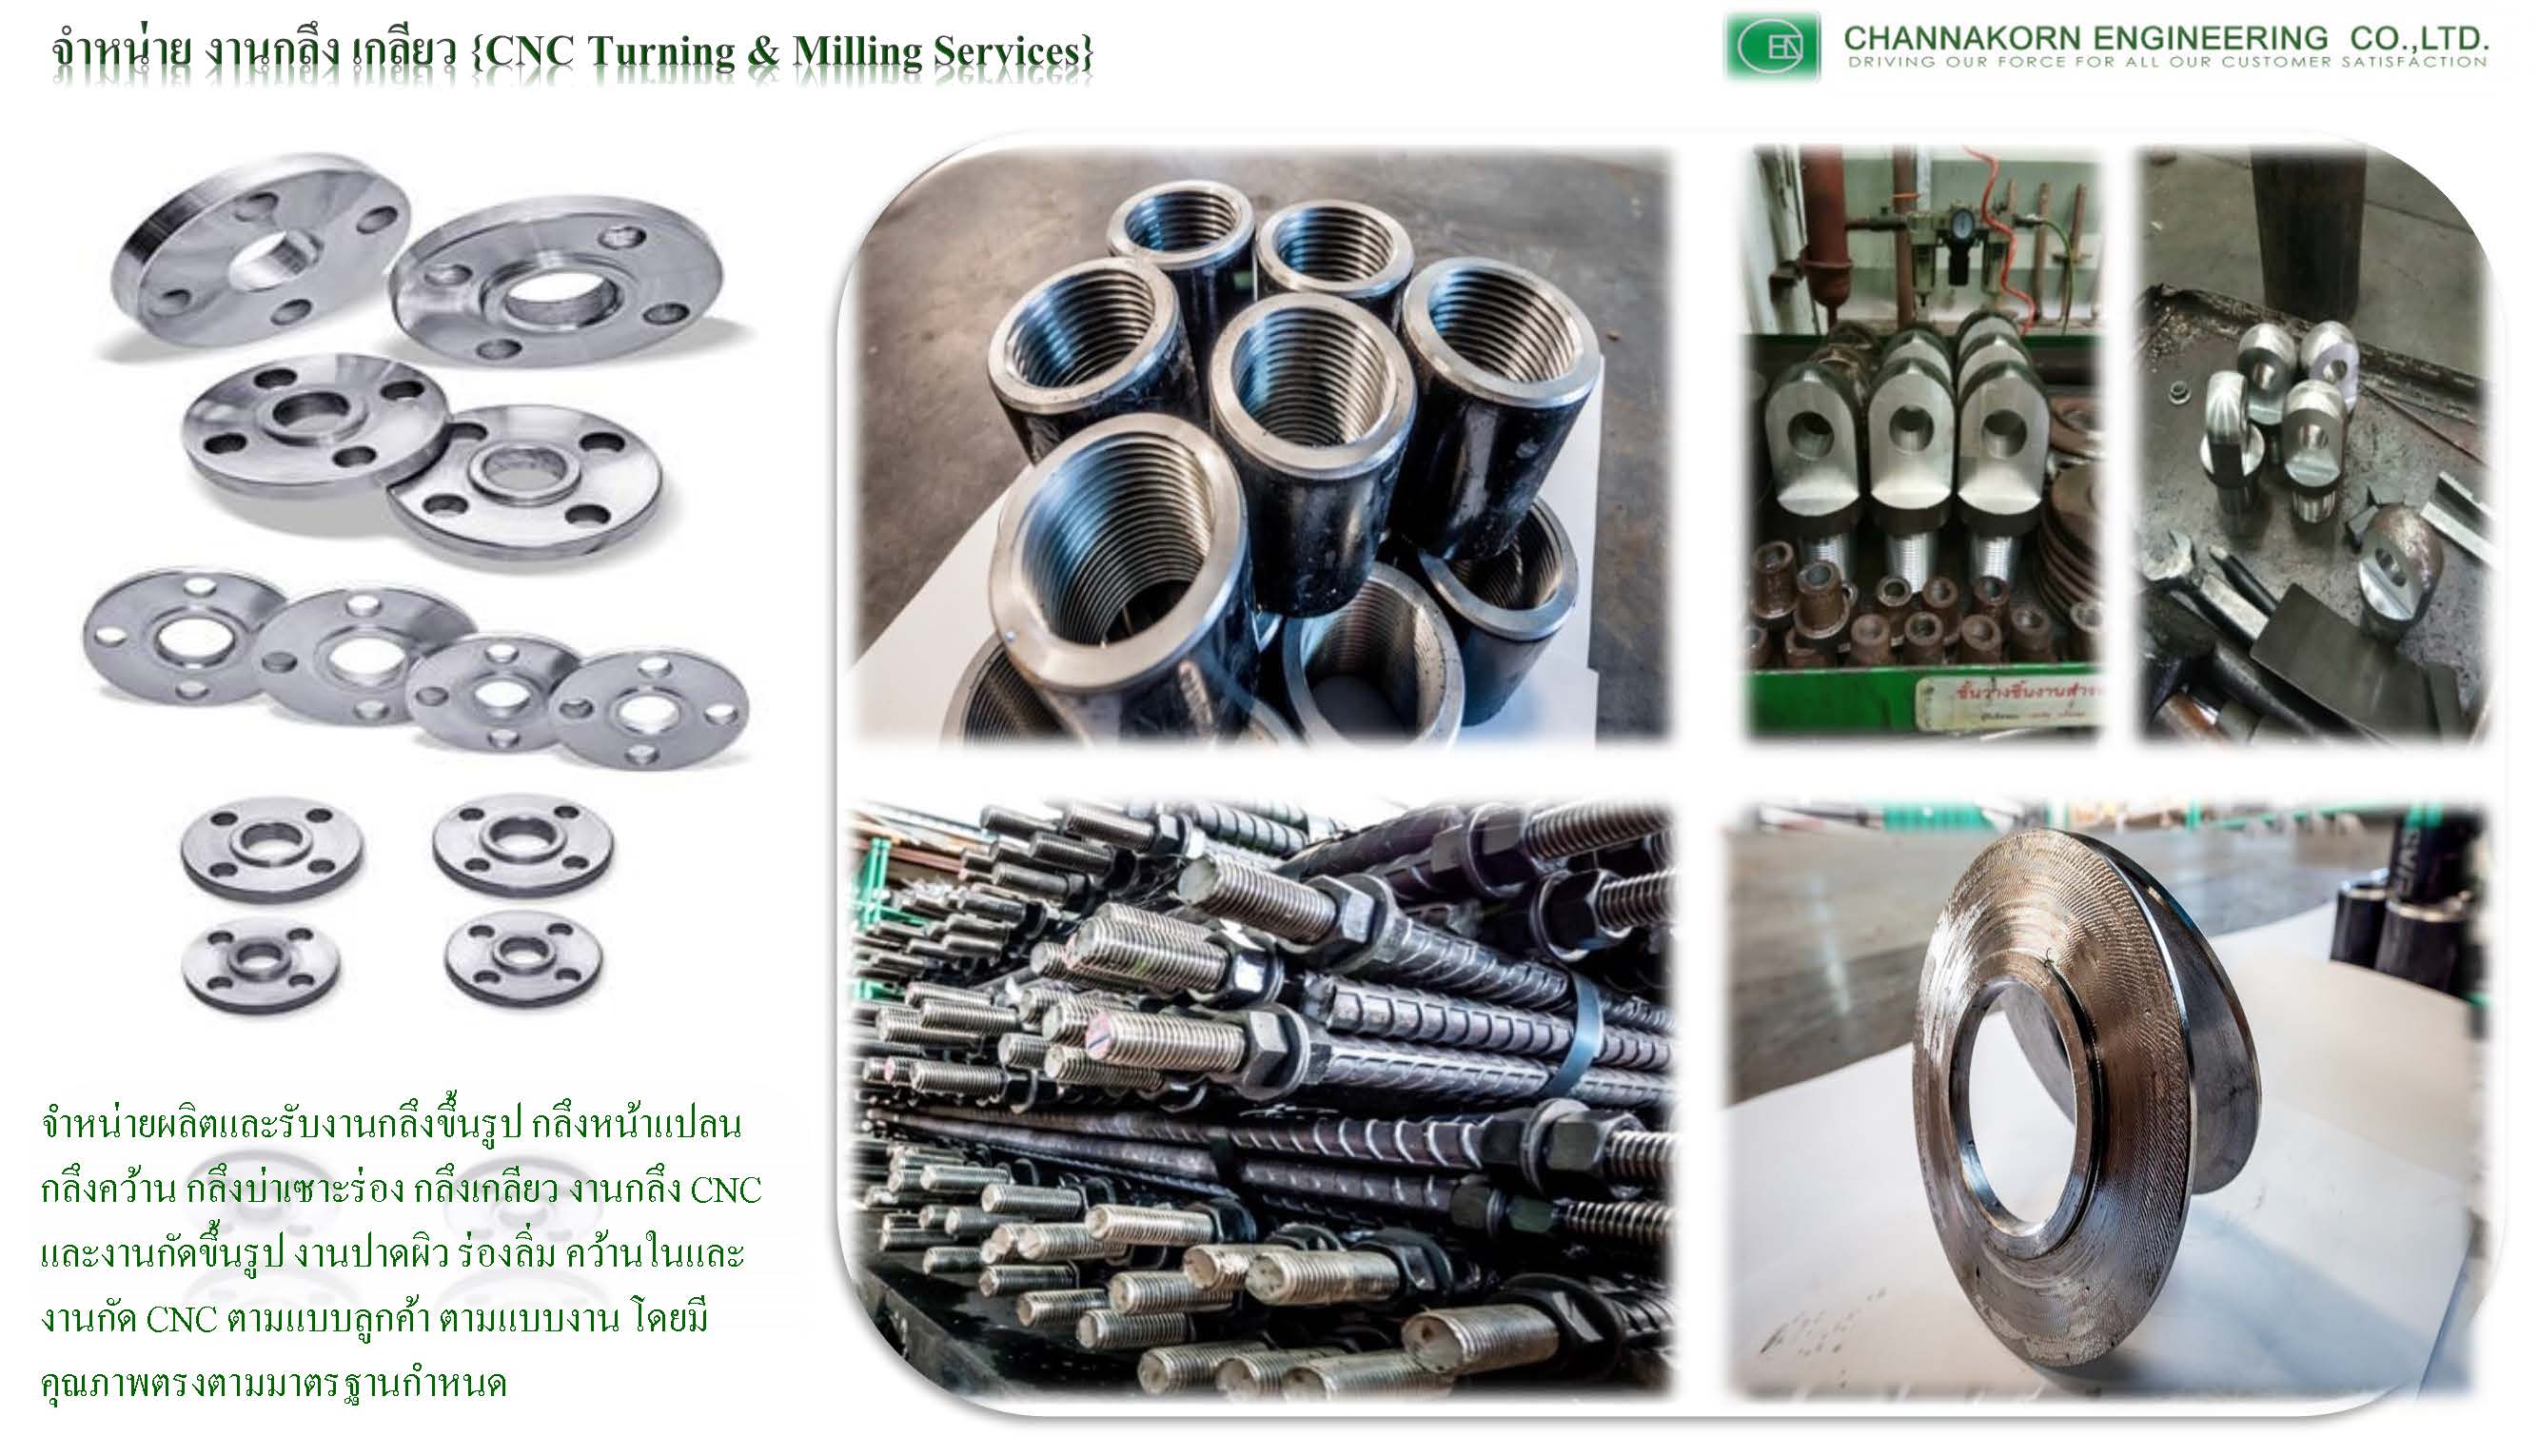 Sell CNC Turning & Milling Services - Channakorn Engineering Co.,Ltd.